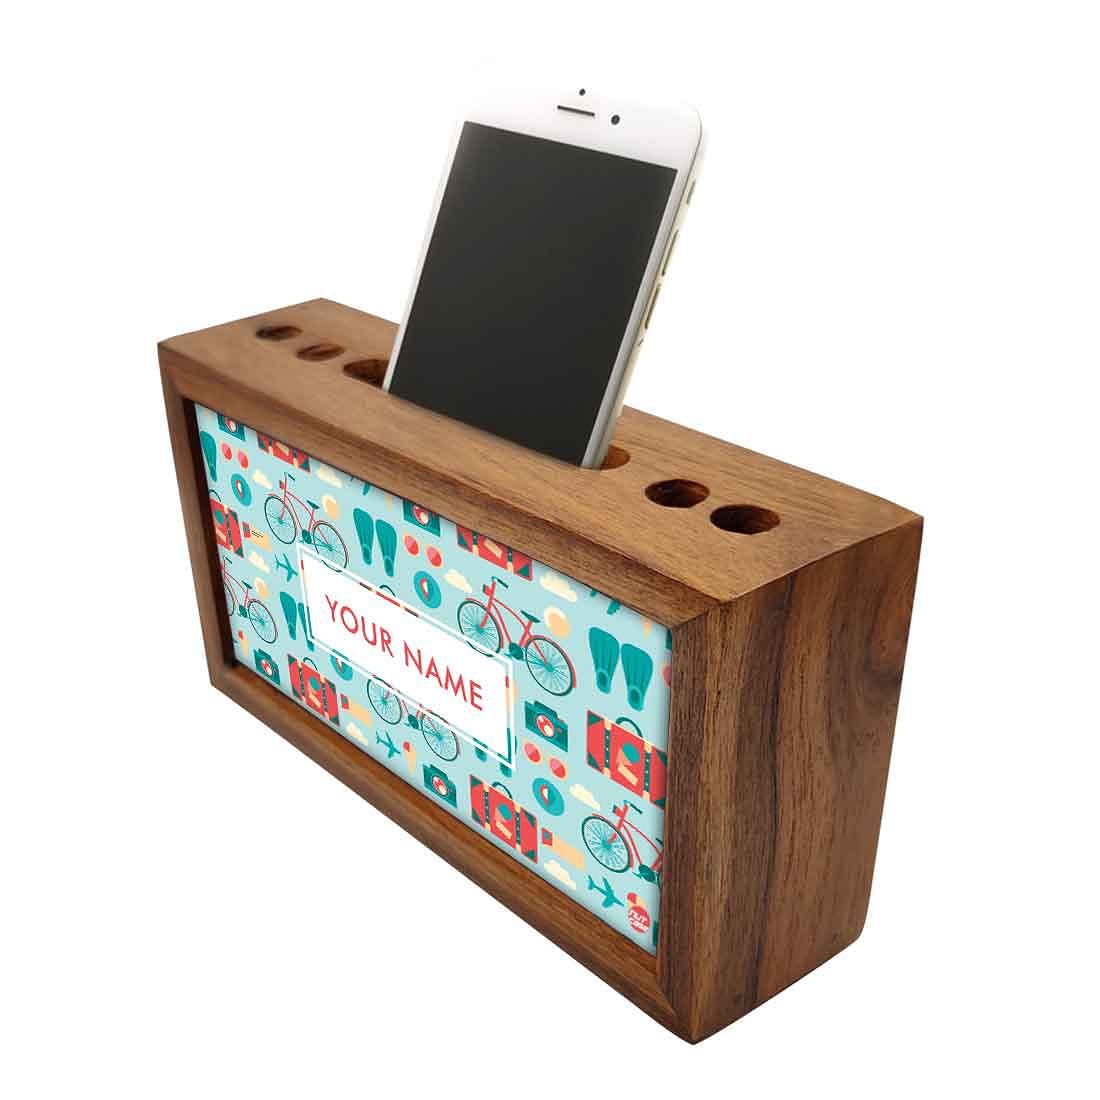 Personalized Wooden desk organizer - Cycle Nutcase